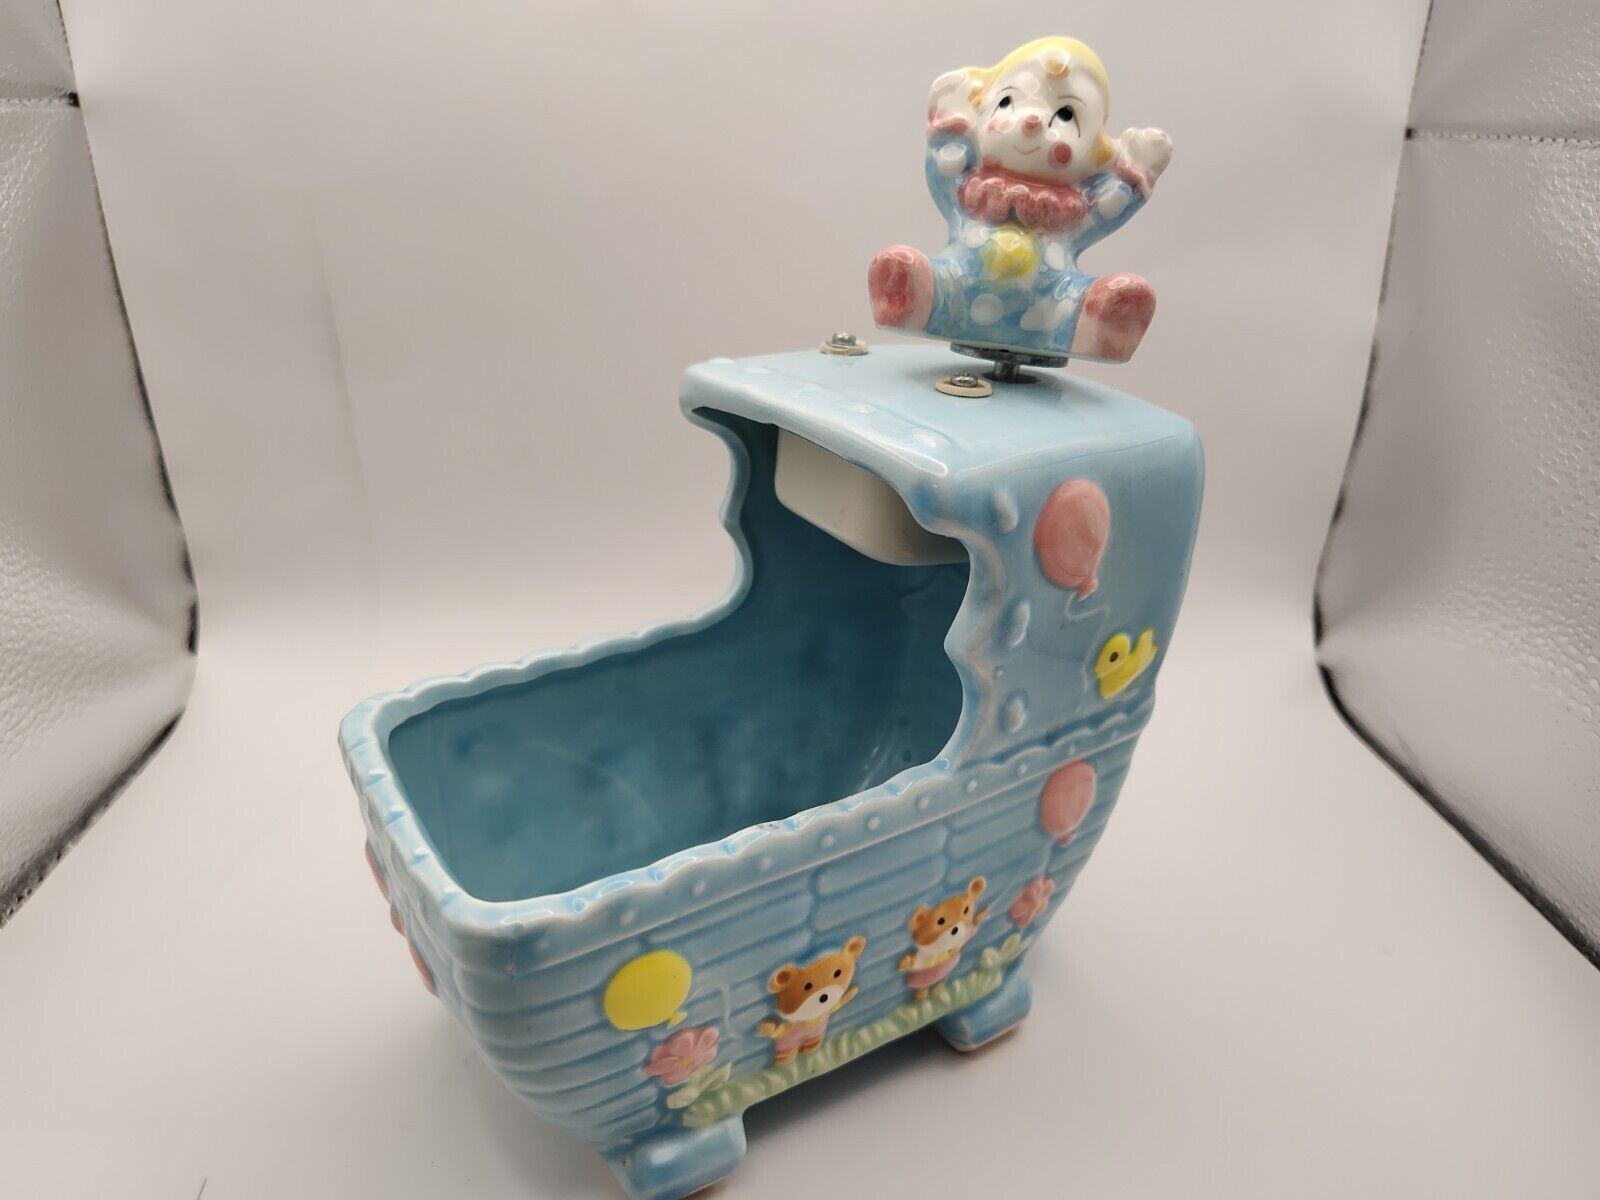 Vintage Ceramic Made In Taiwan Carriage Planter Blue Rock-a-bye Baby Music Box